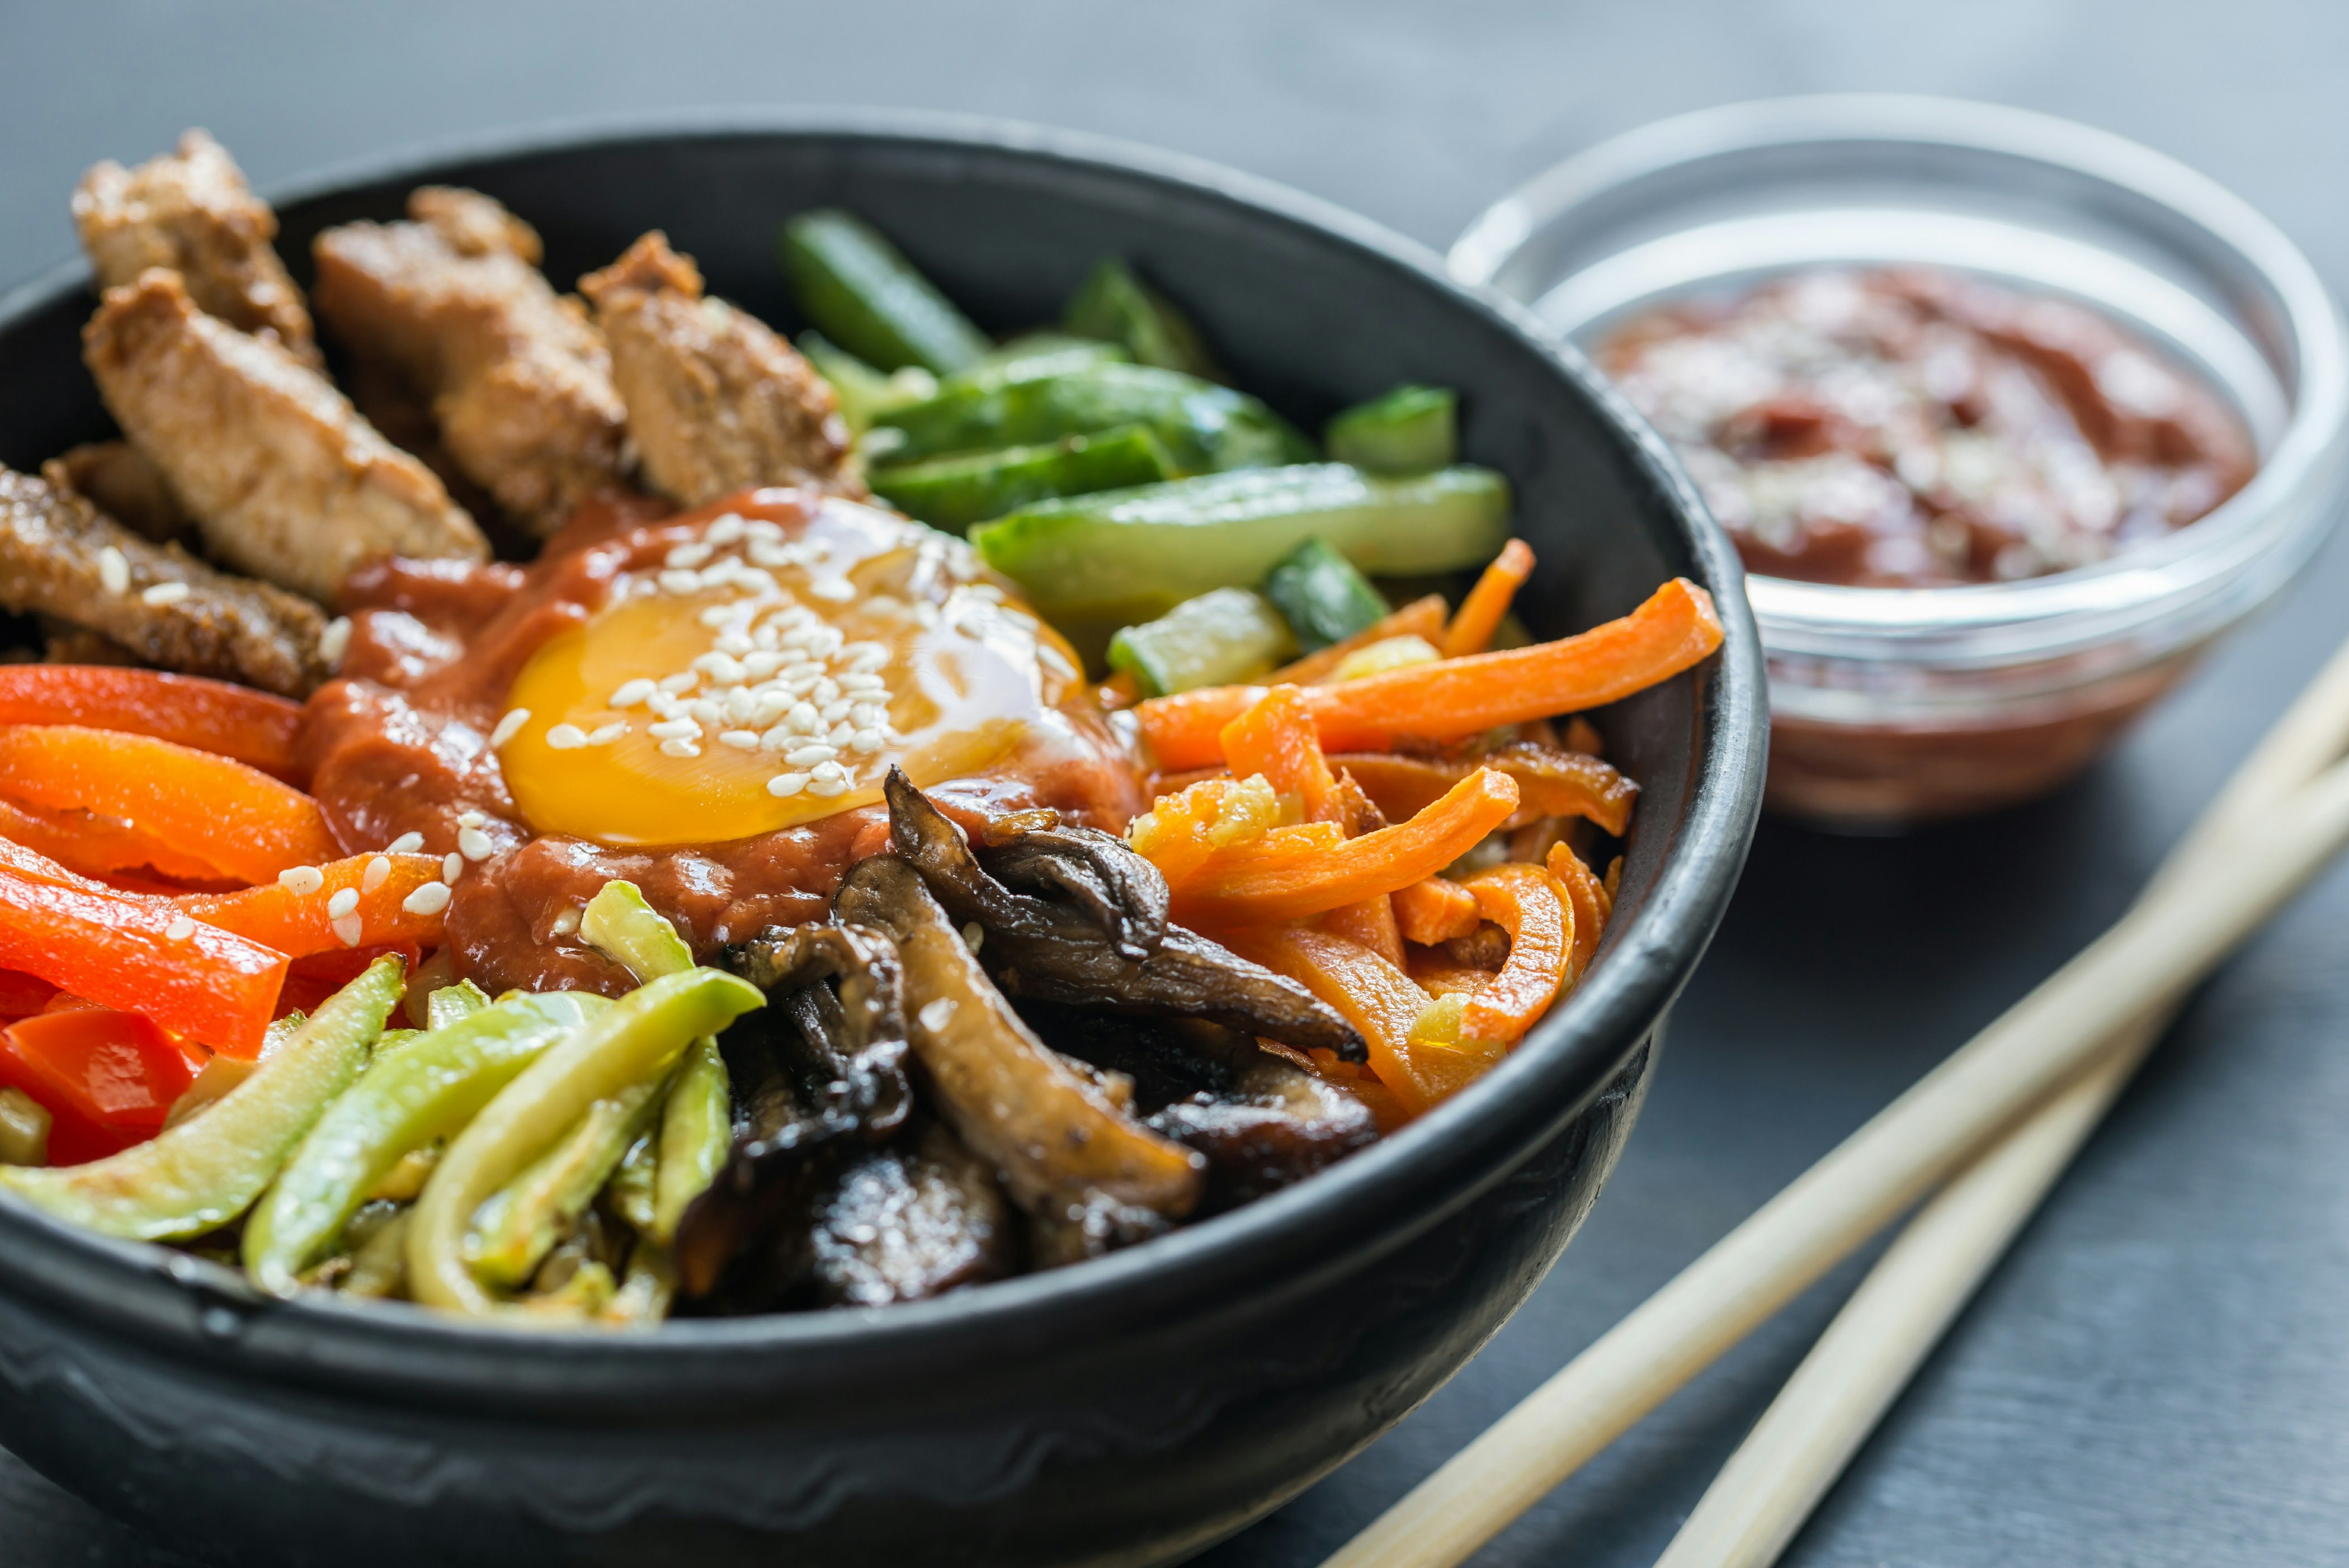 A close-up view of a bowl of bibimbap, a Korean rice dish which also contains vegetables and shredded meat. Alongside the black bowl containing the food is a small bowl of sauce and a pair of chopsticks.